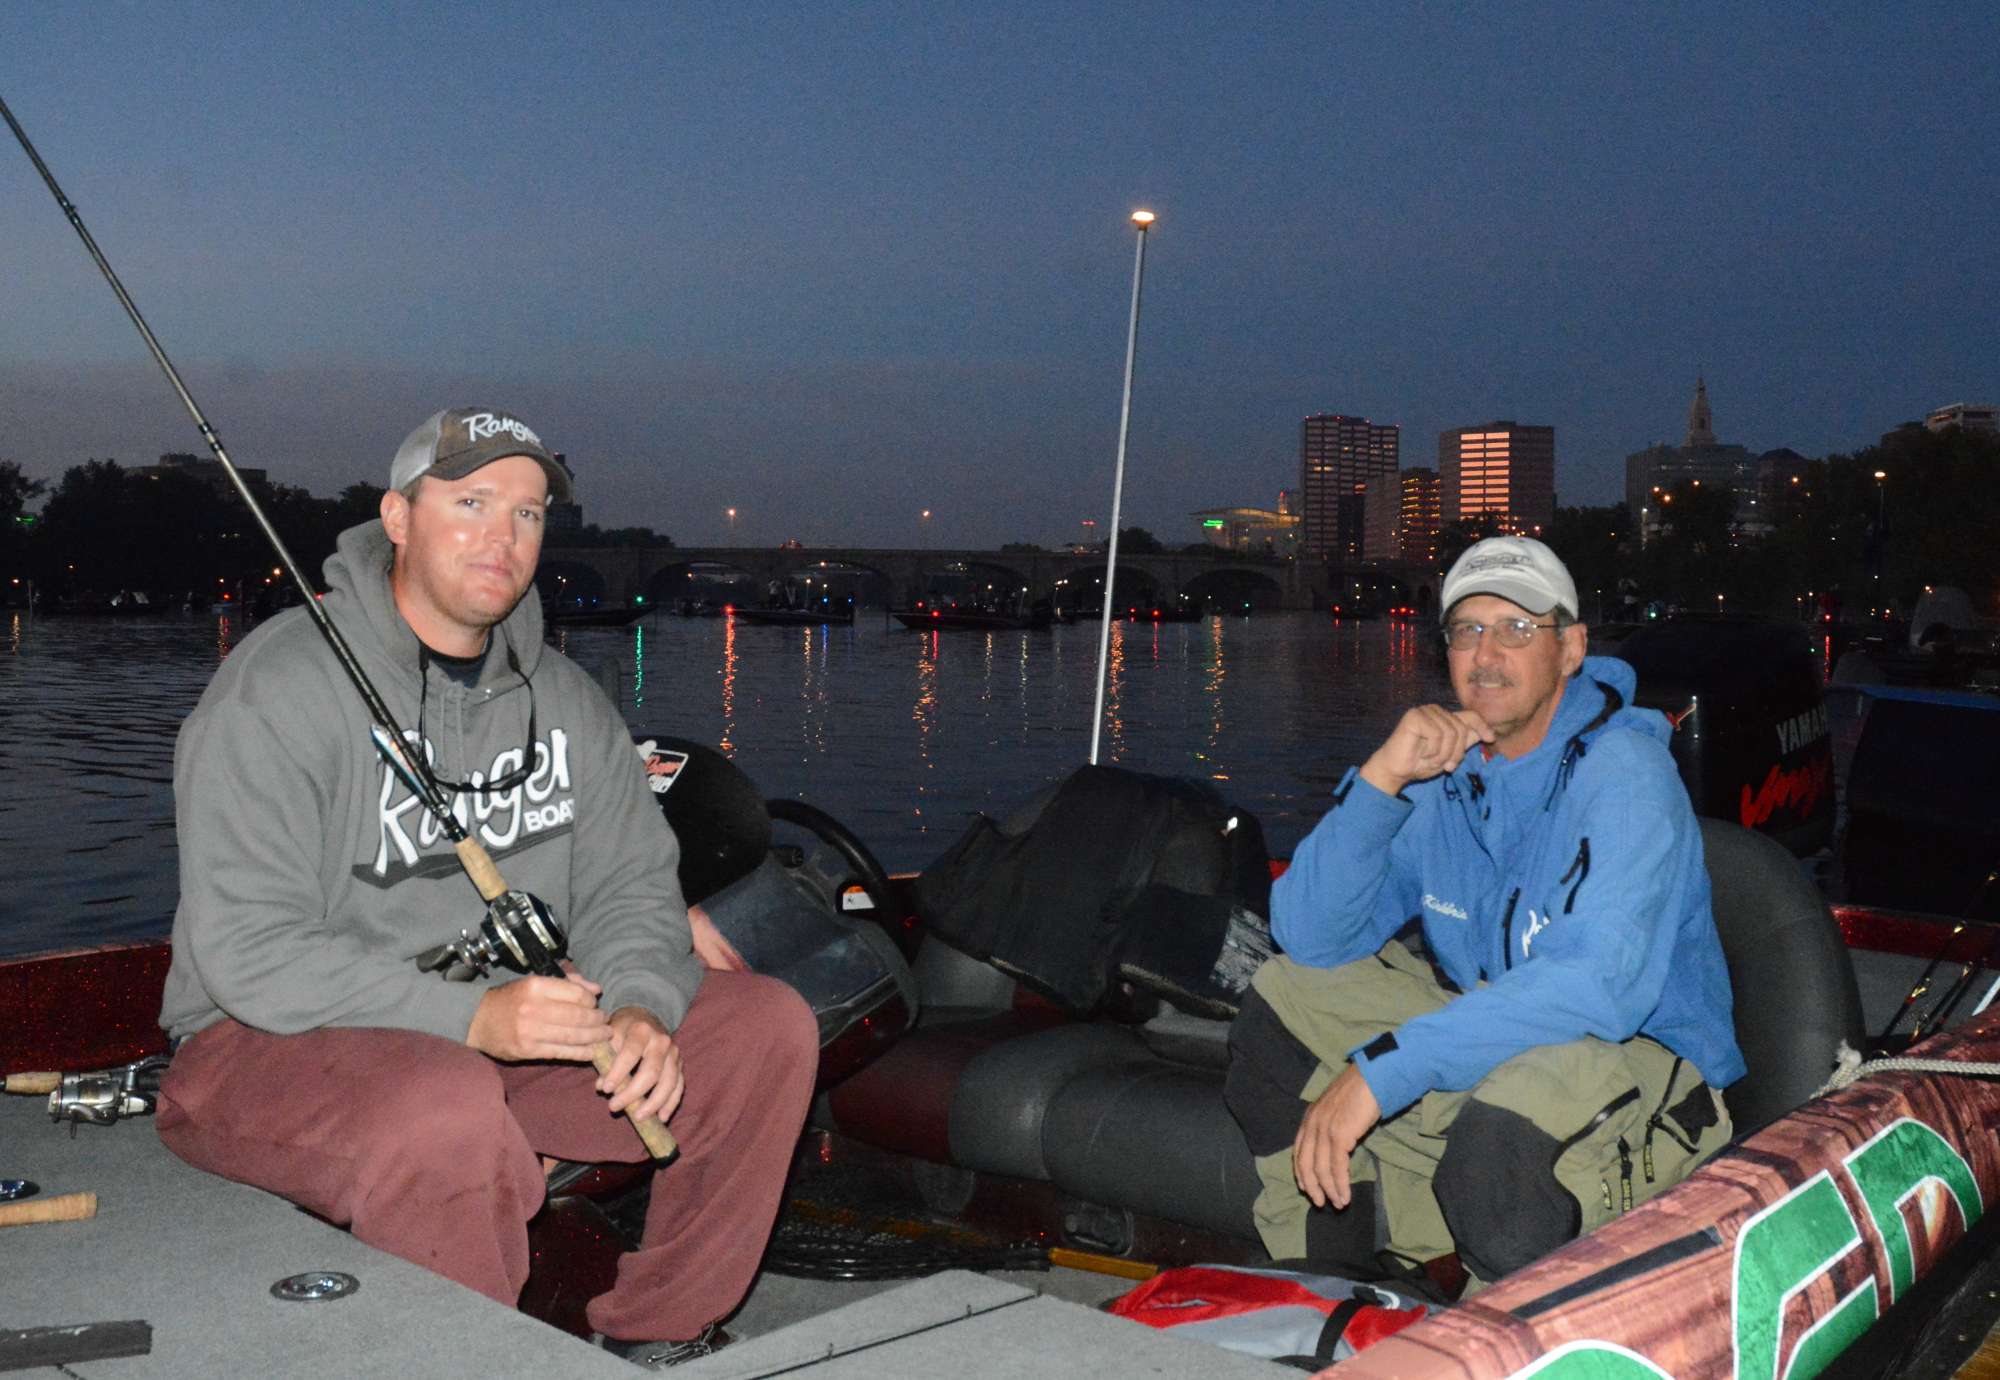 Chris Adams of Vermont and Doug Kirkbride of New York are the third boat in the lineup.